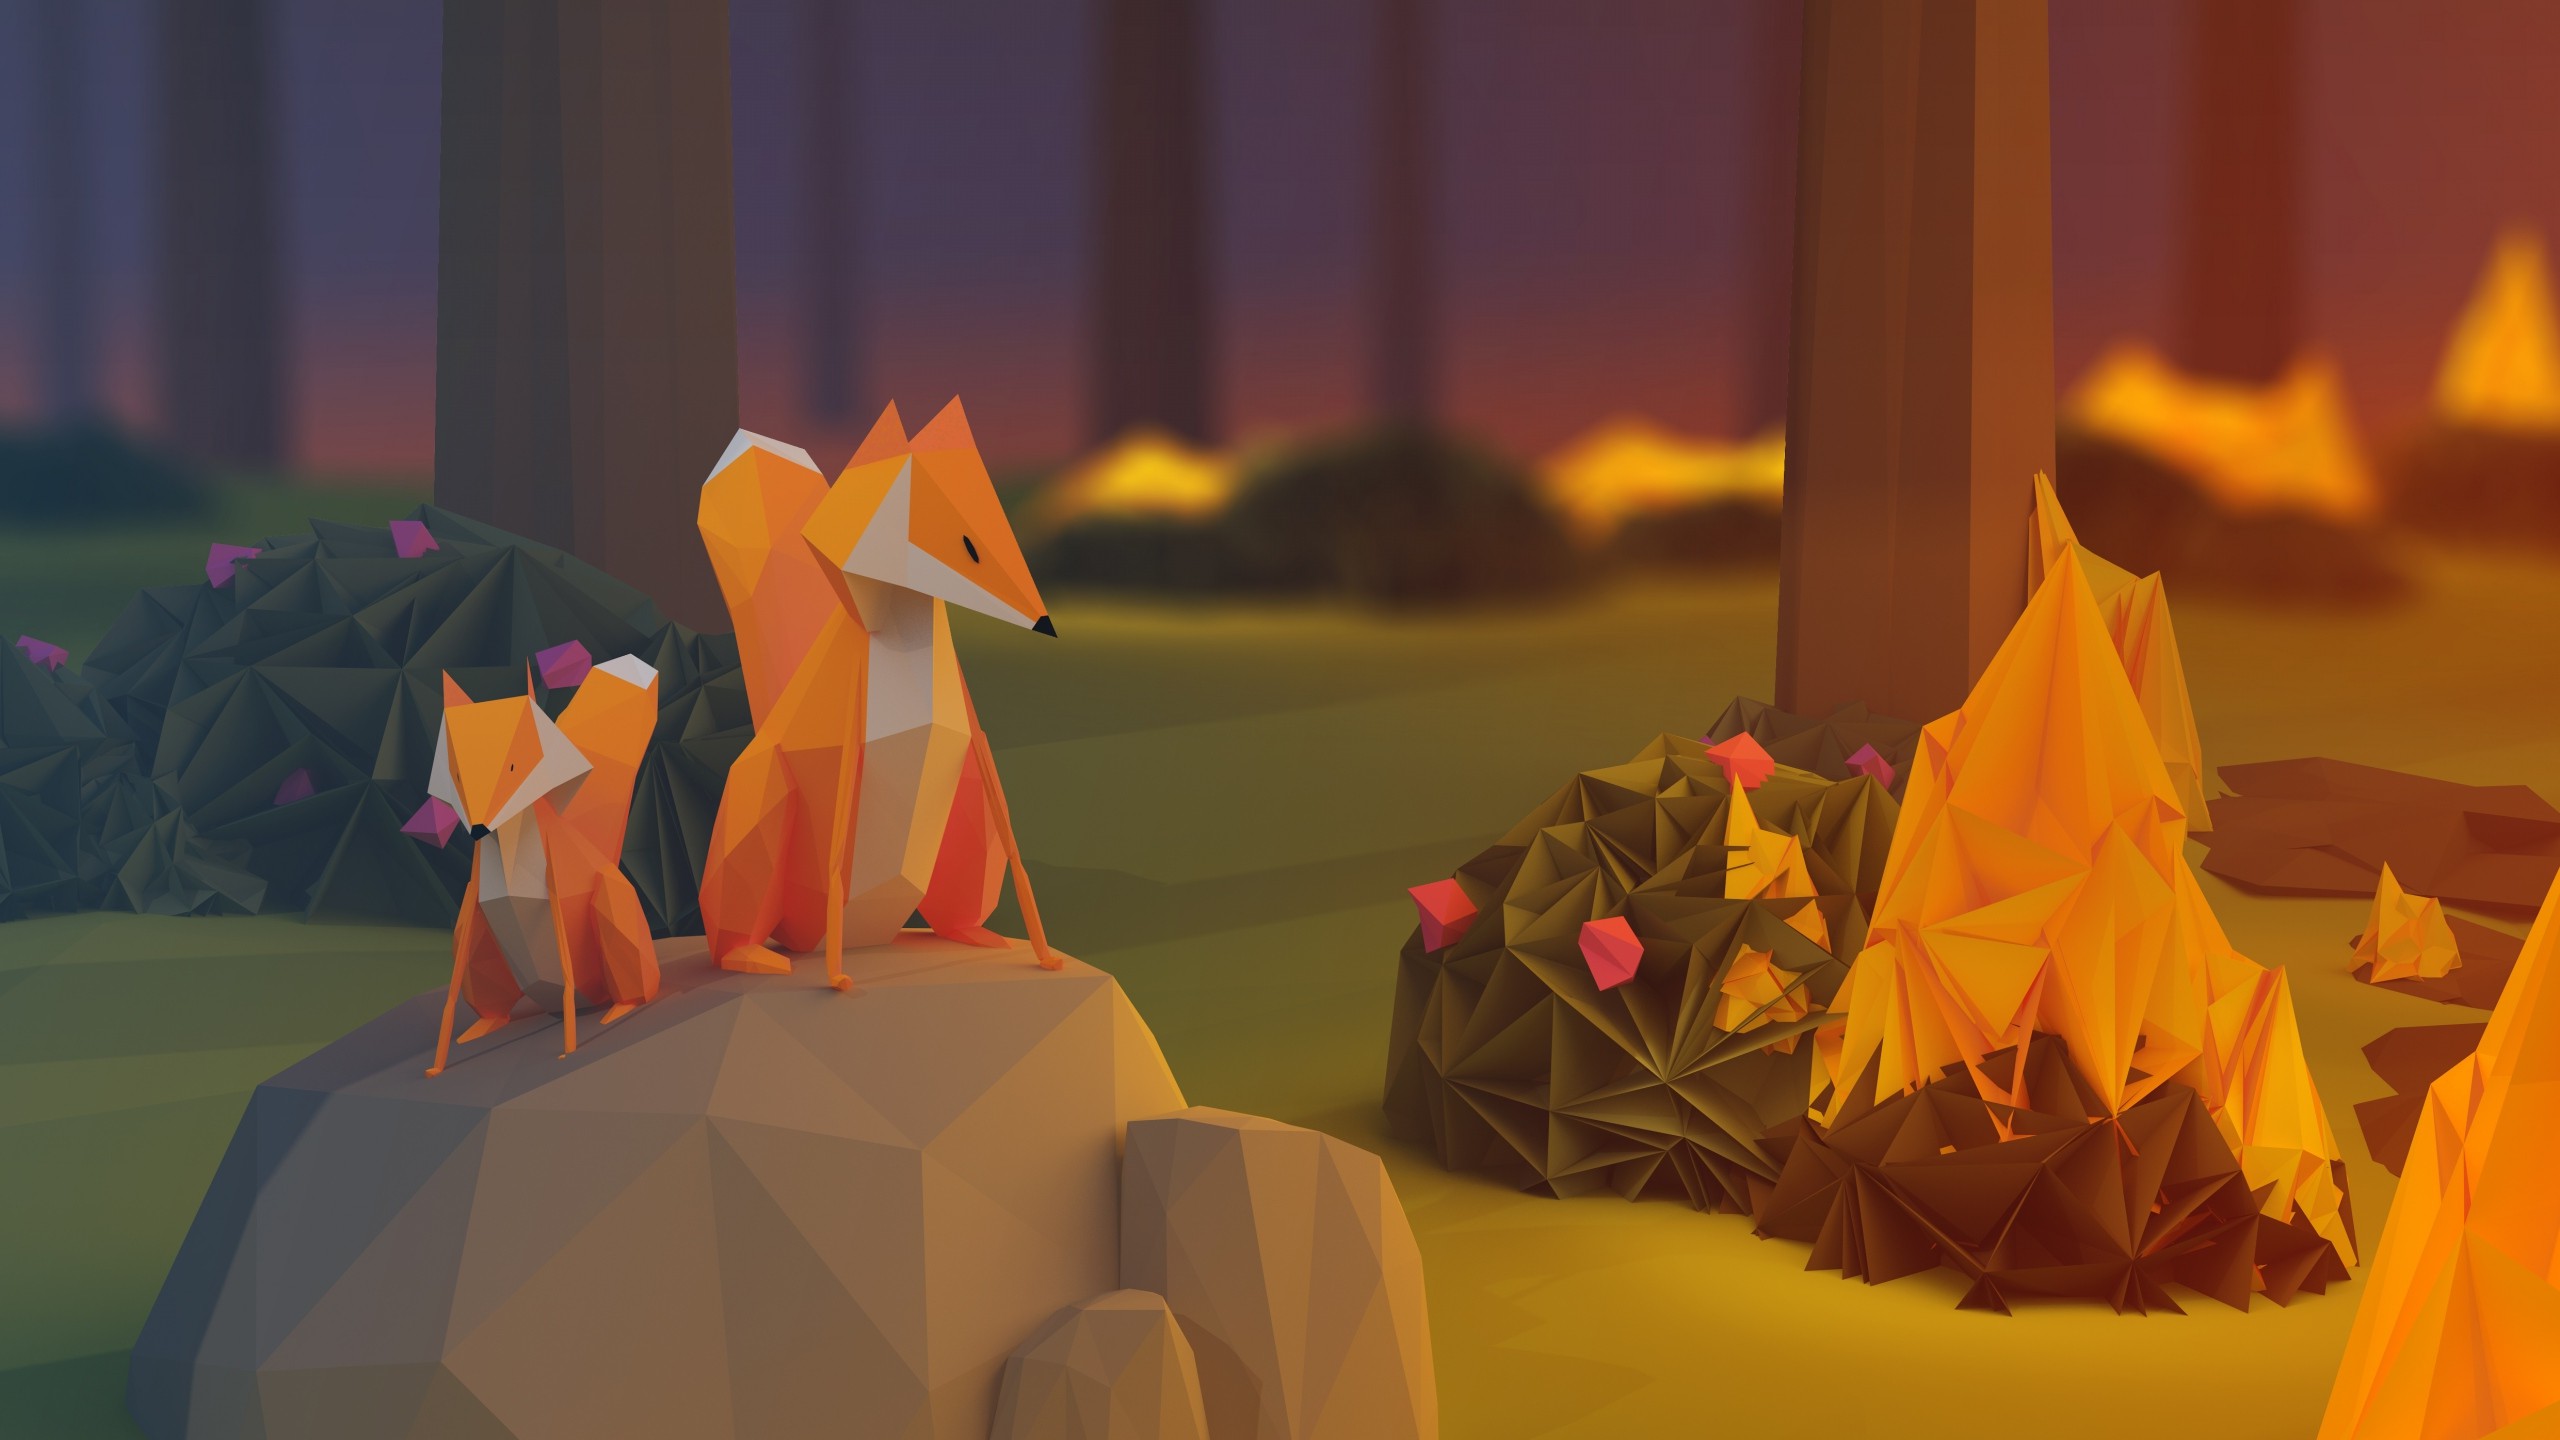 anime, Paper, Poly, Fire, Minimalism, Nature, Animals, Fox, Rock, Low Poly, Digital Art, Stones, Plants, Trees, Flowers, Baby Animals Wallpaper